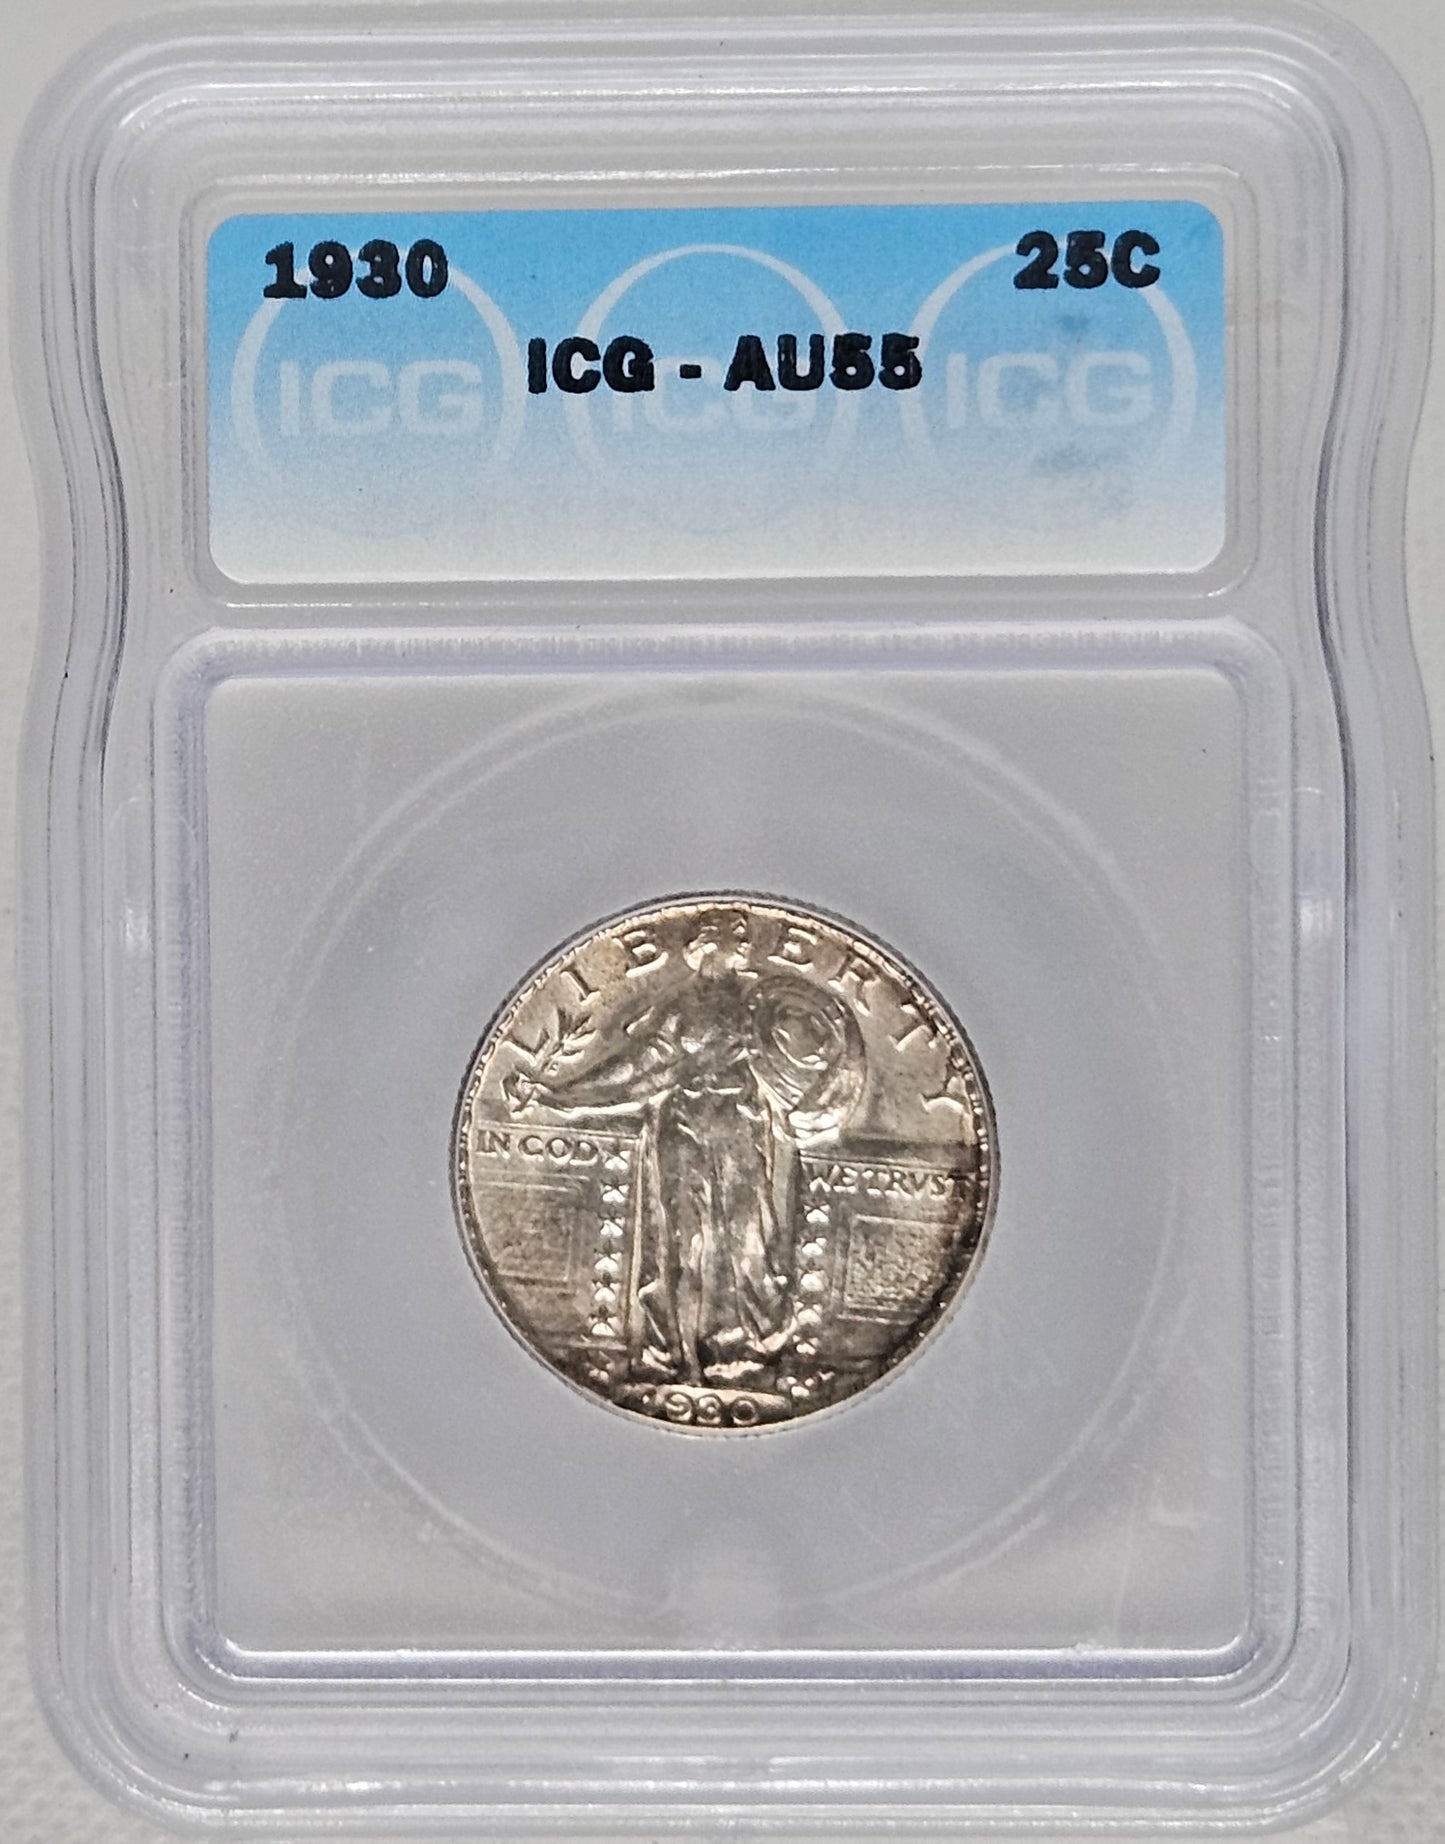 1930-P Standing Liberty Quarter  ICG AU55  A Beautiful Coin with Lots of Detail and Great Toning!!